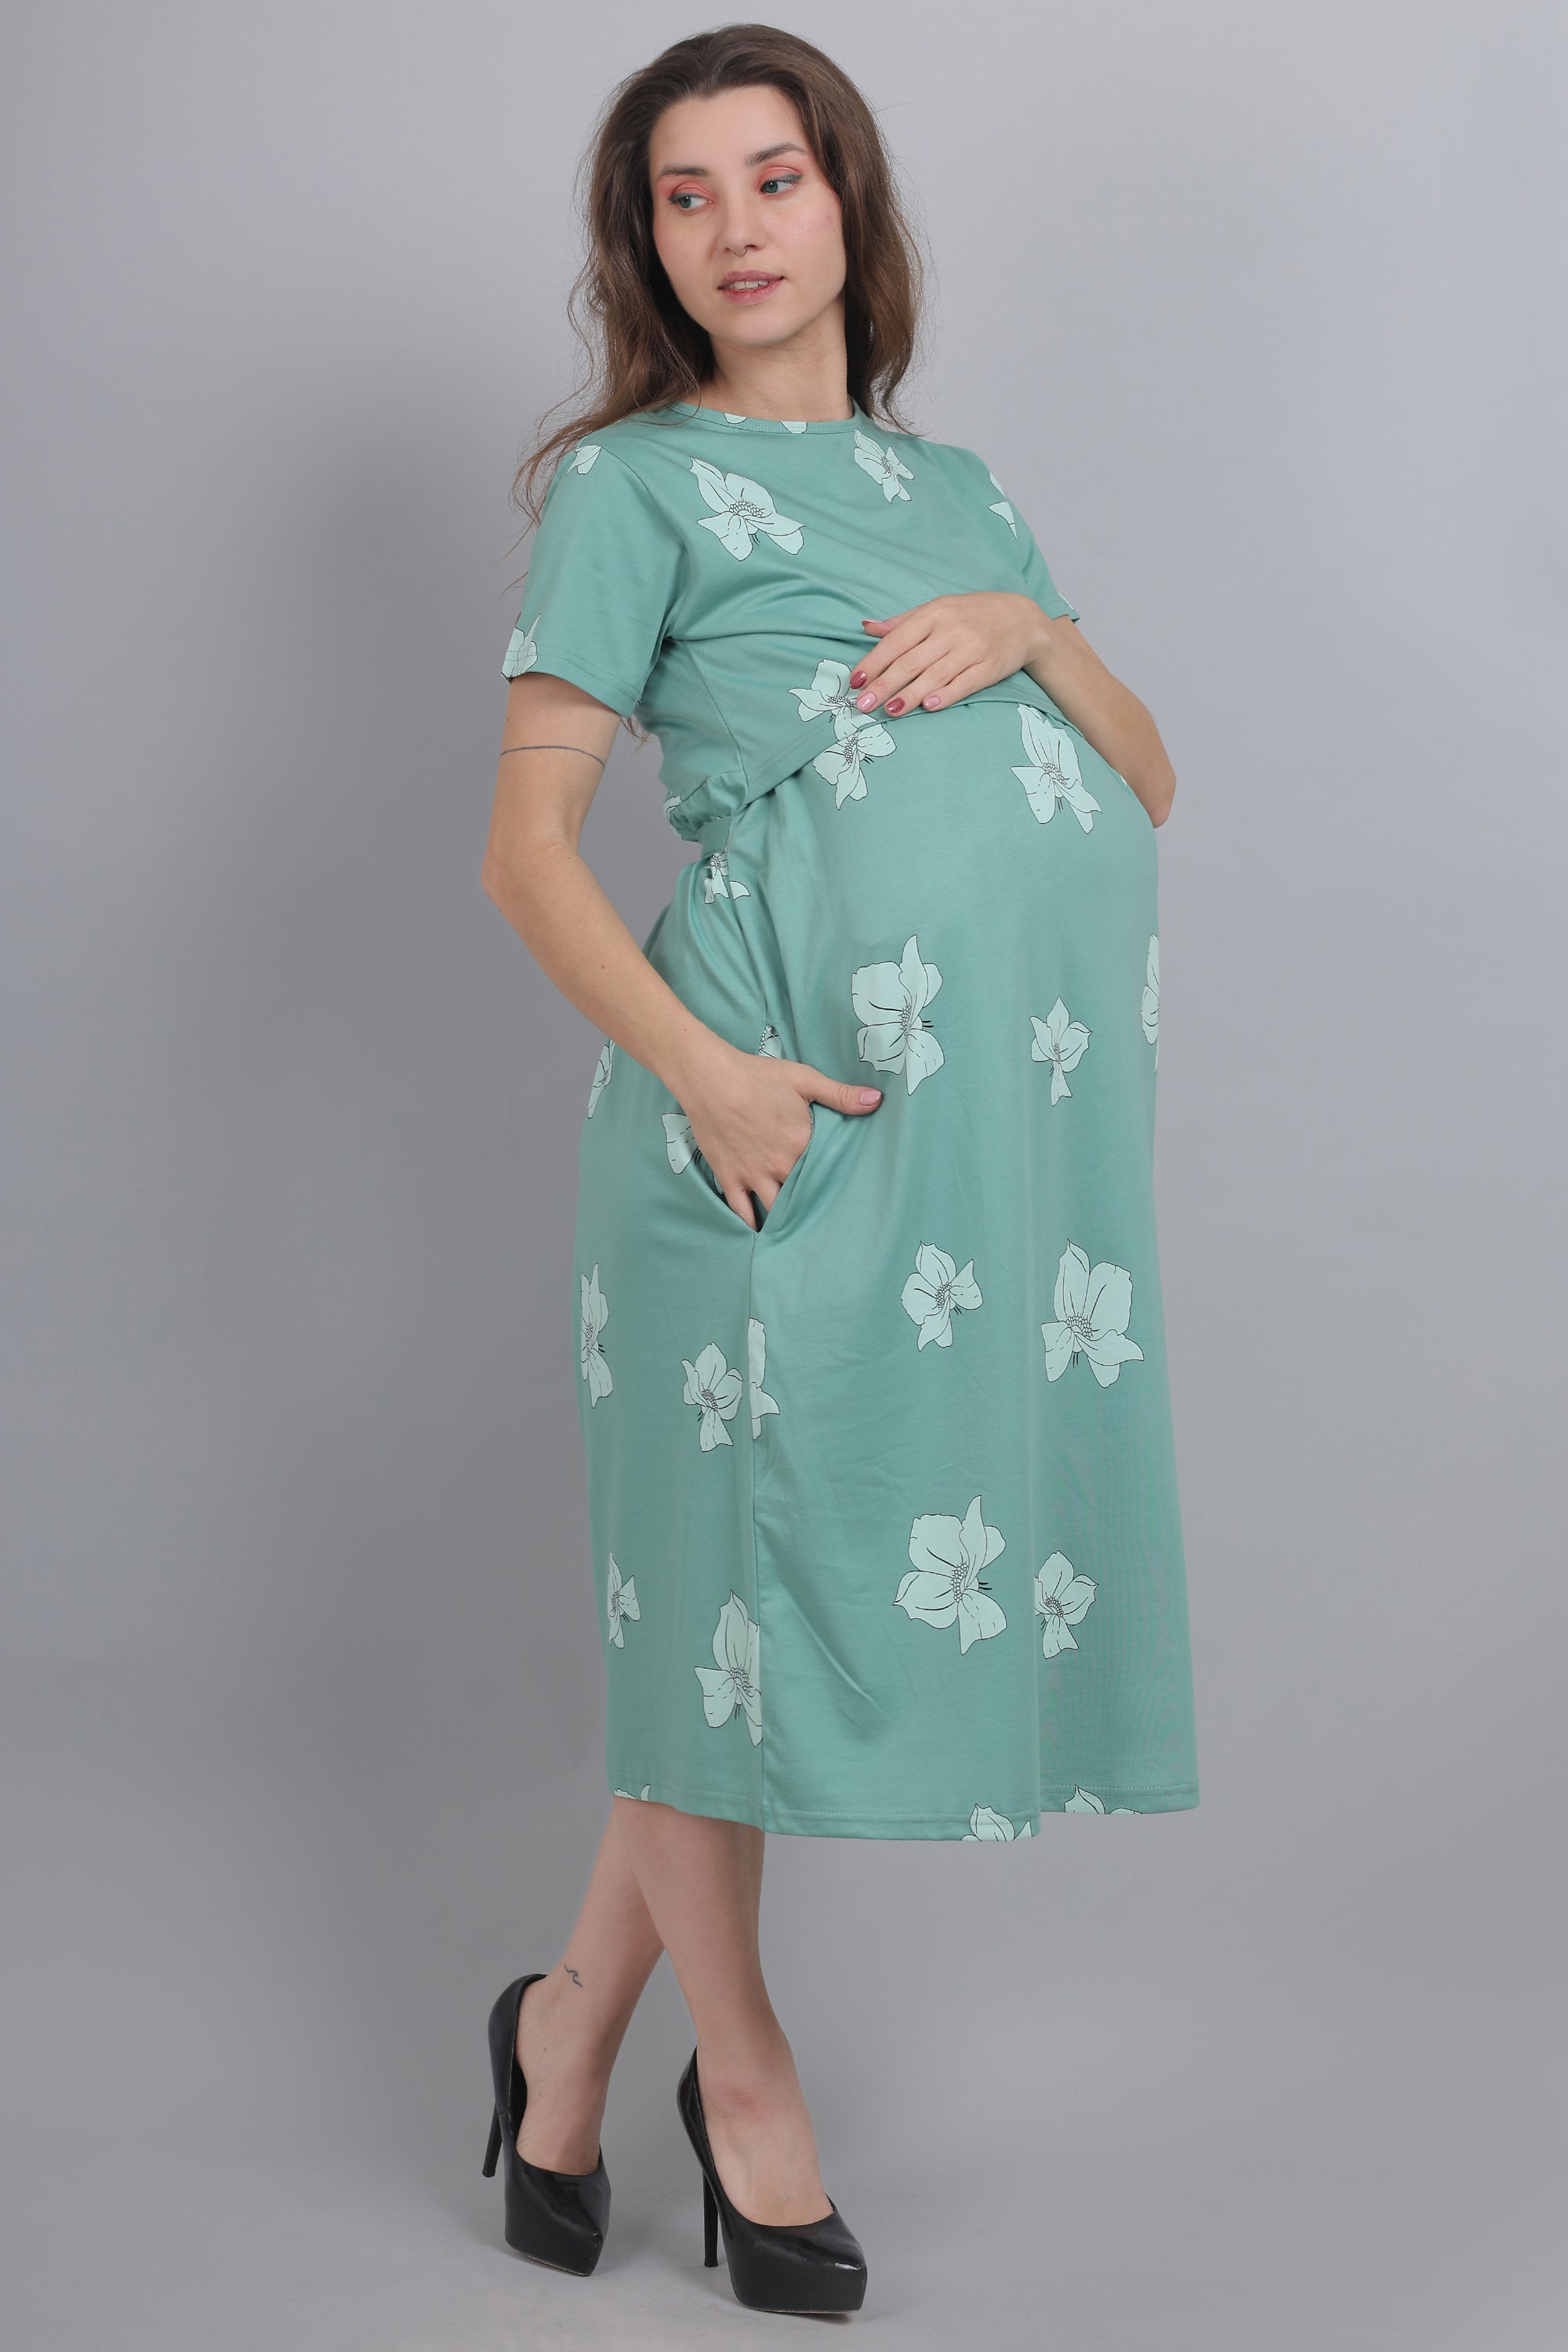 Turquoise Green Knitted Cotton Maternity Loungewear Dress